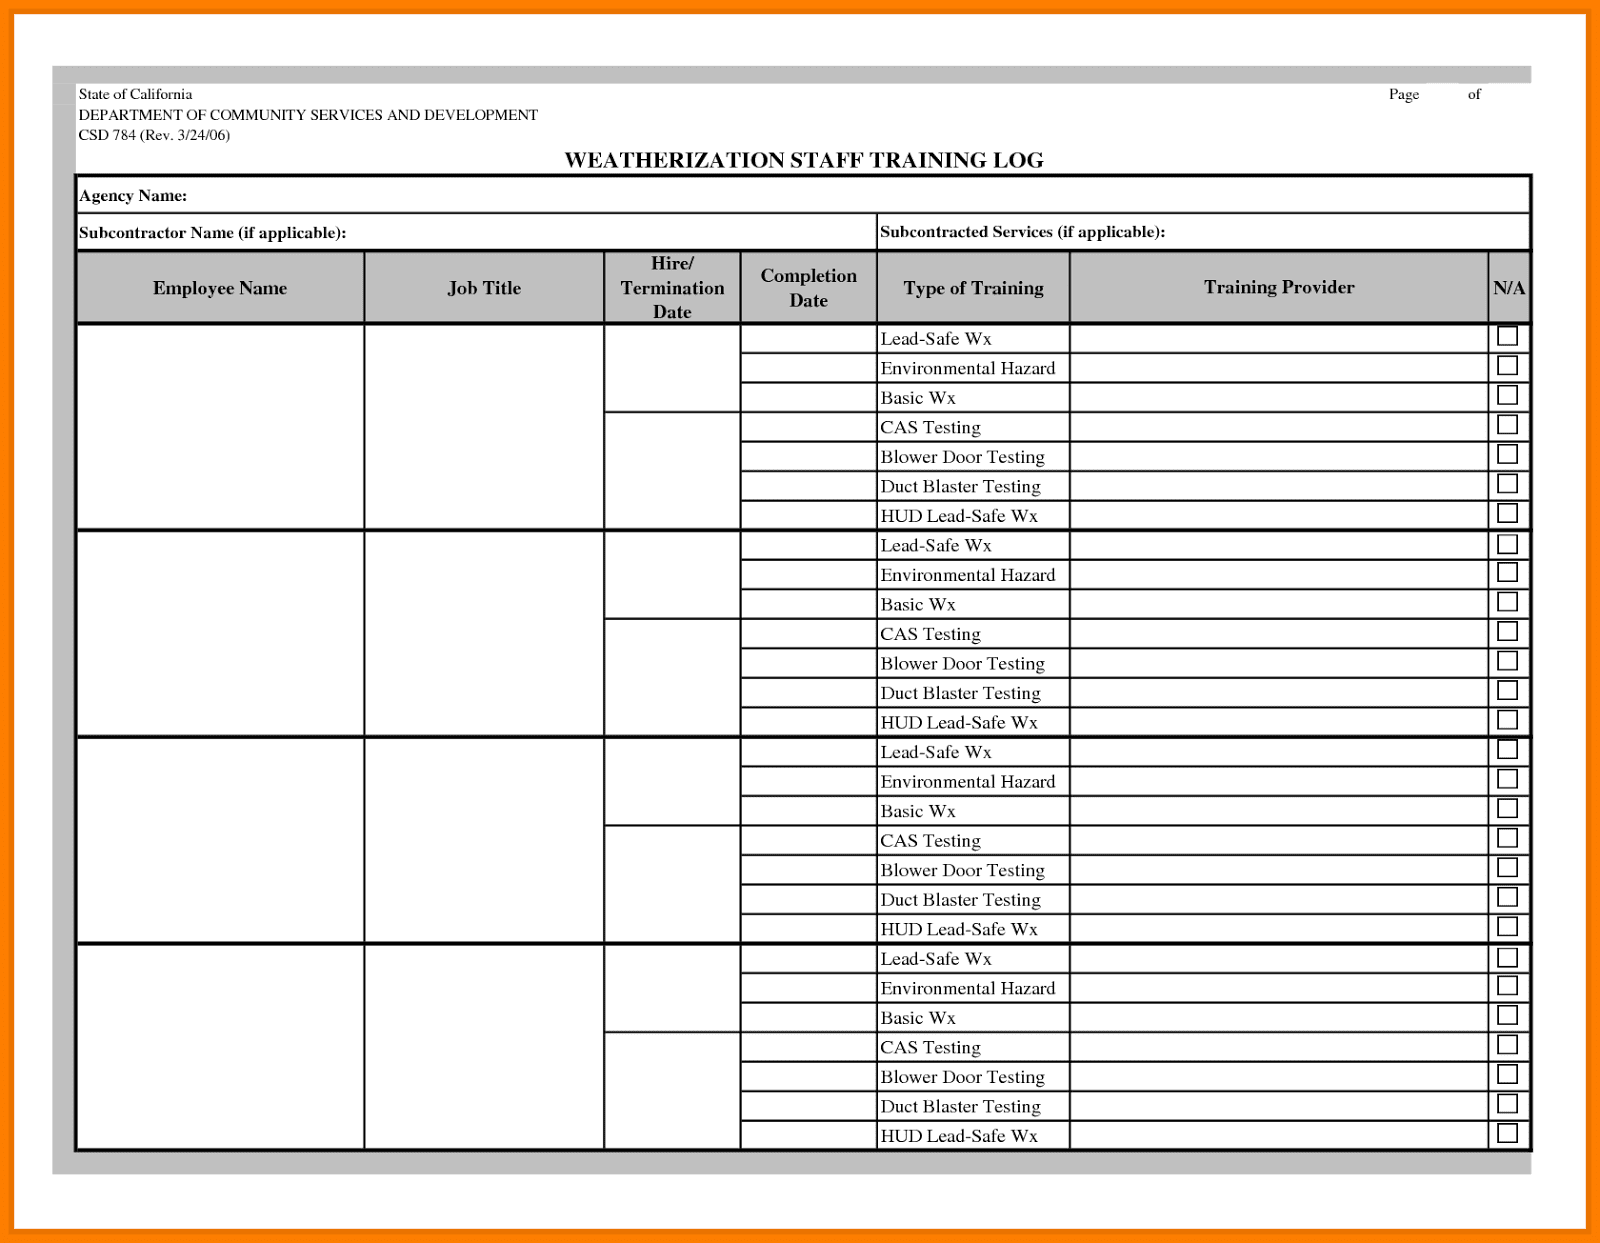 10 Minute Gym workout log book pdf for Gym